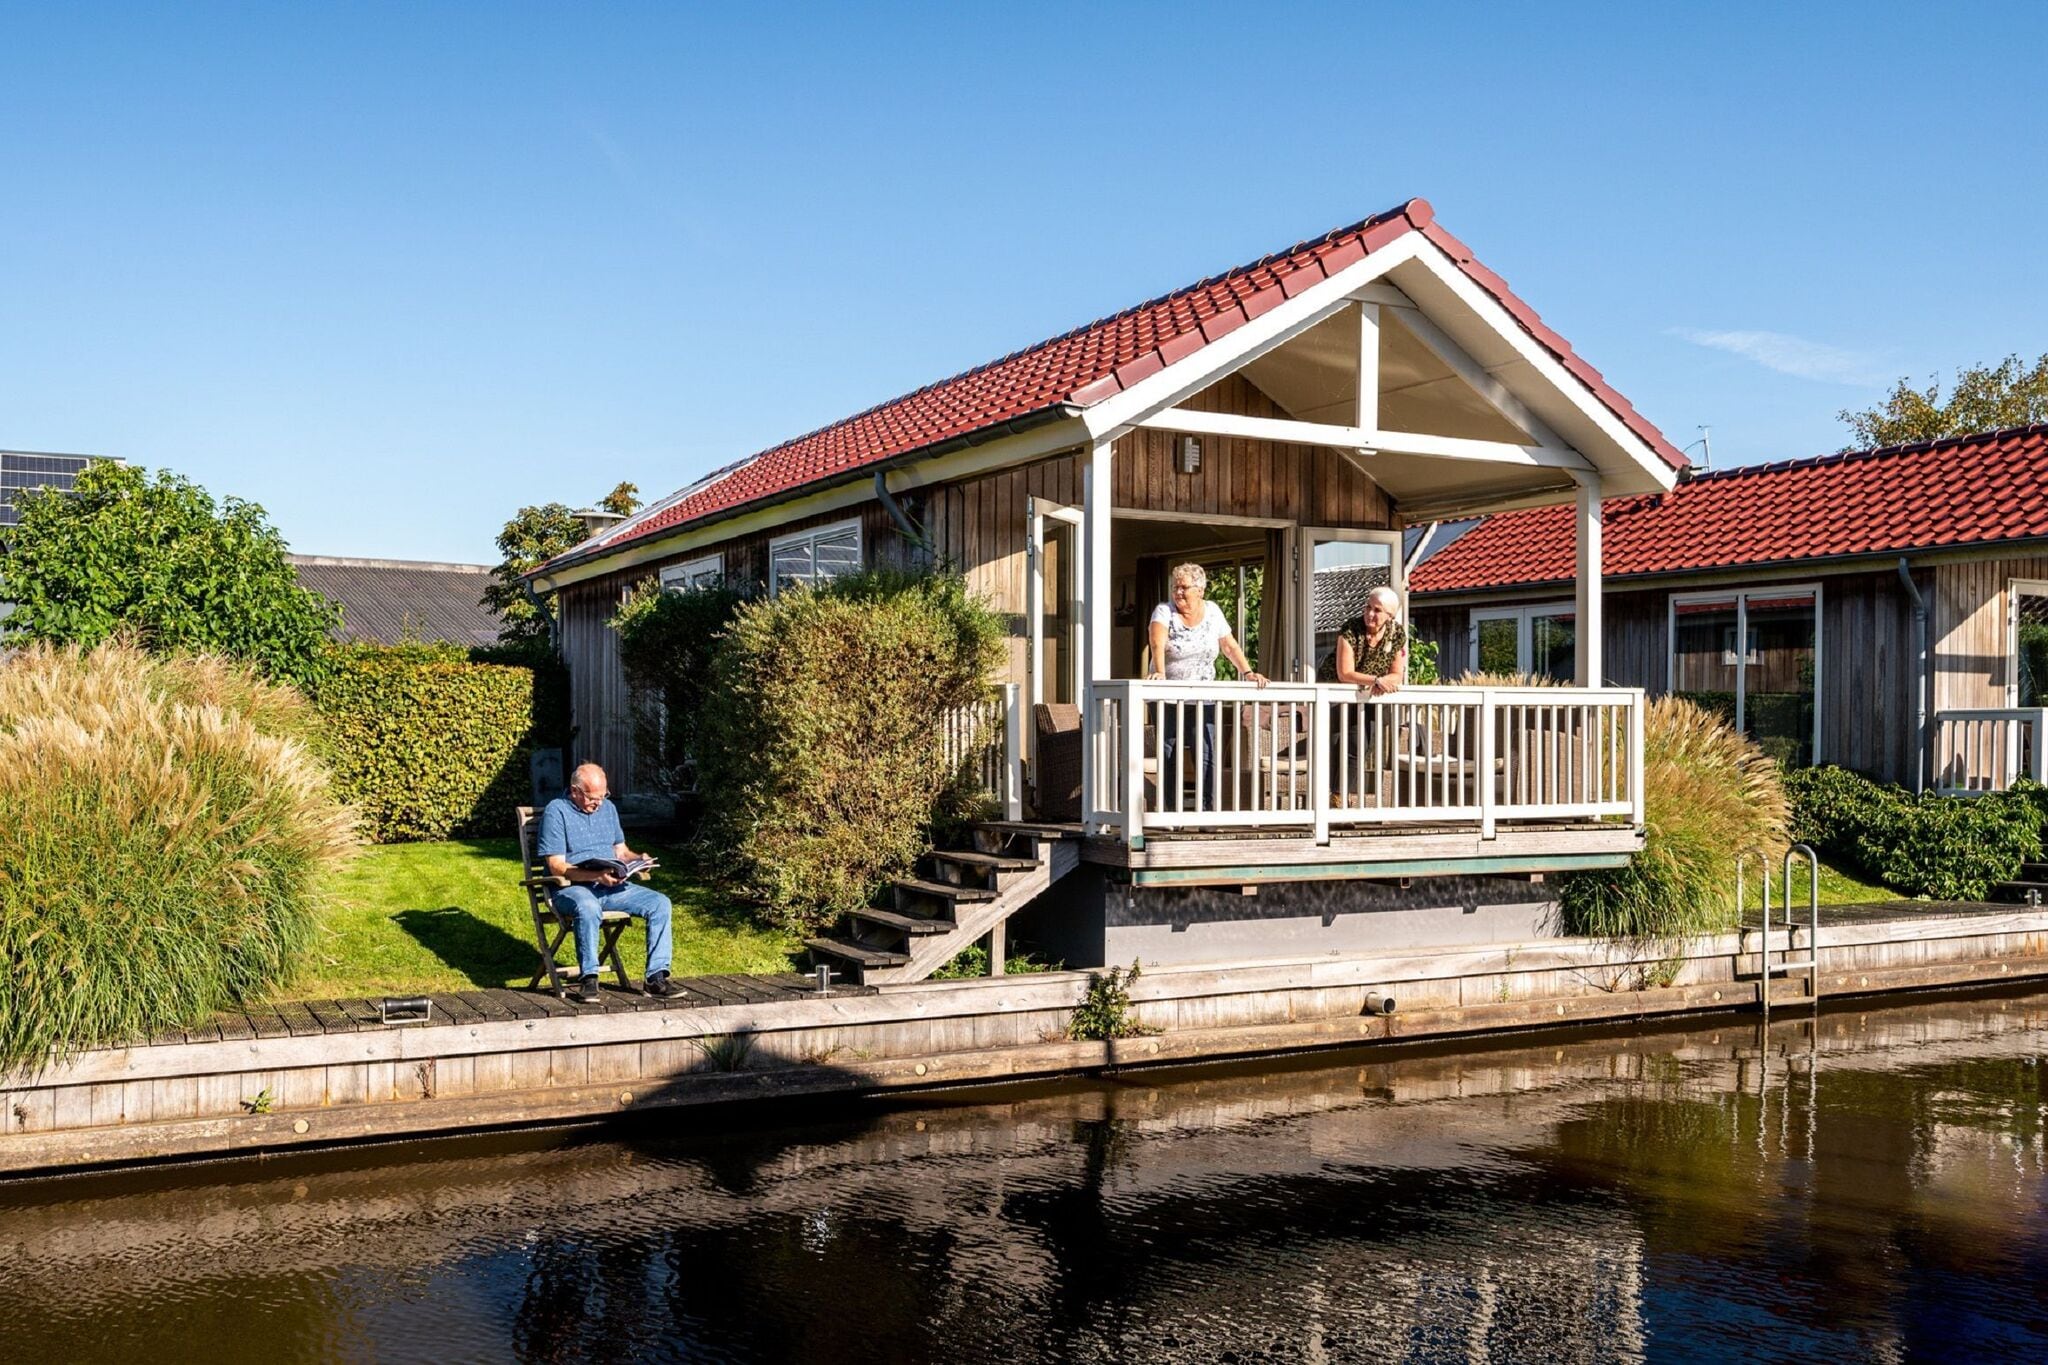 Cozy chalet right on the water in Friesland